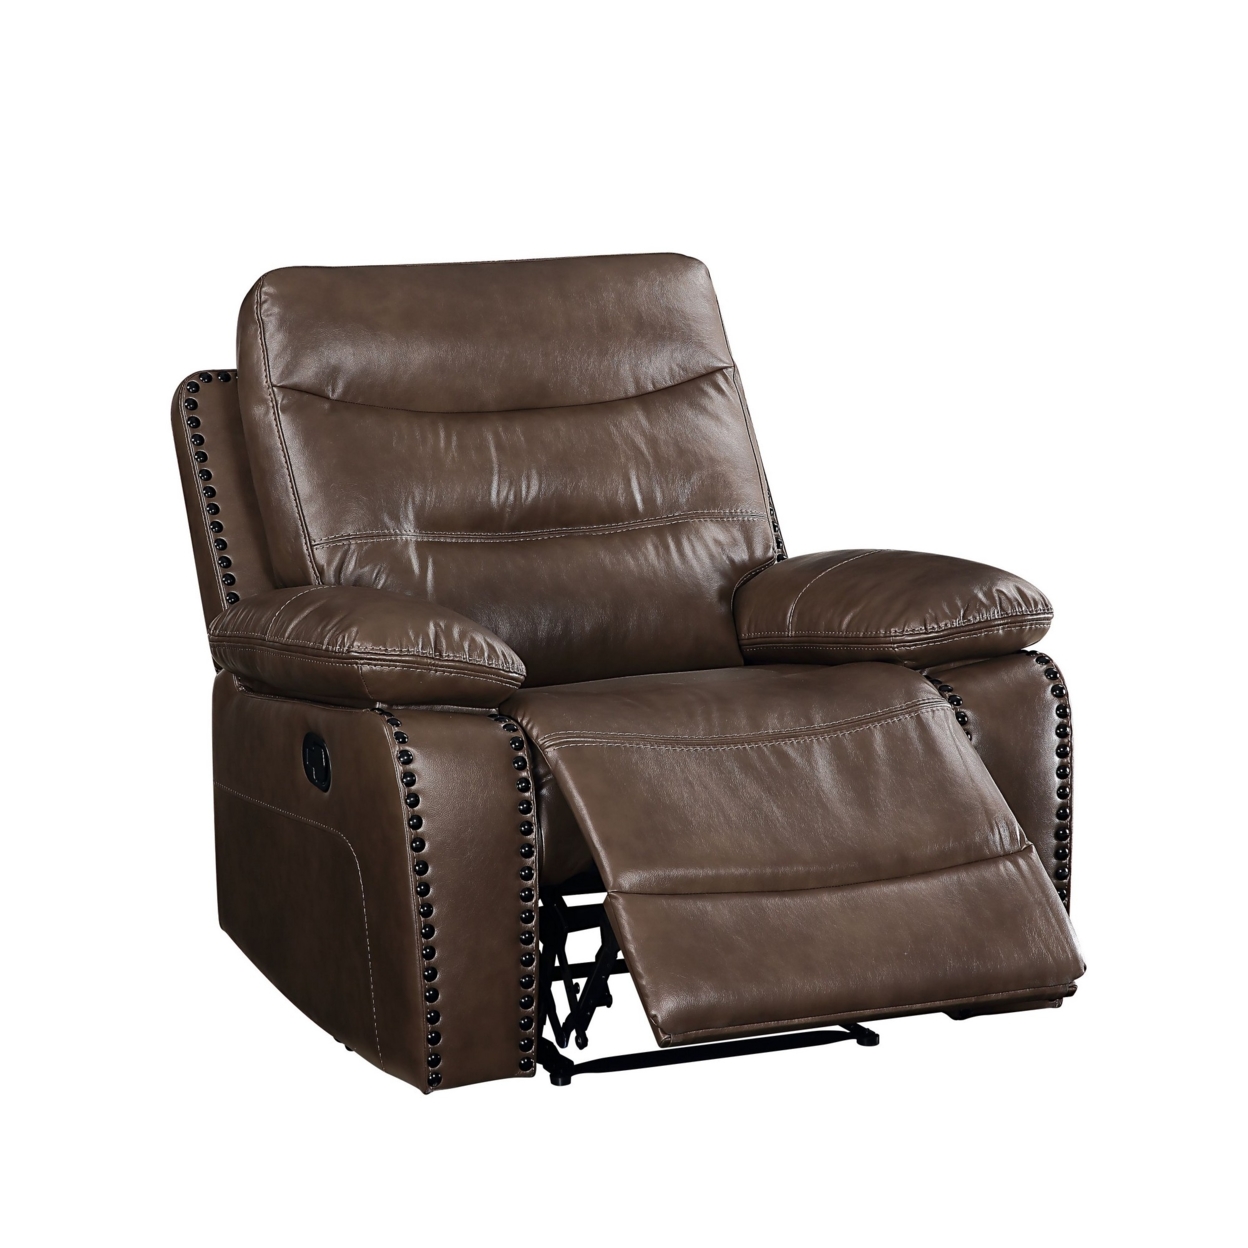 Recliner With Leatherette Upholstery And Tufted Seat, Brown- Saltoro Sherpi